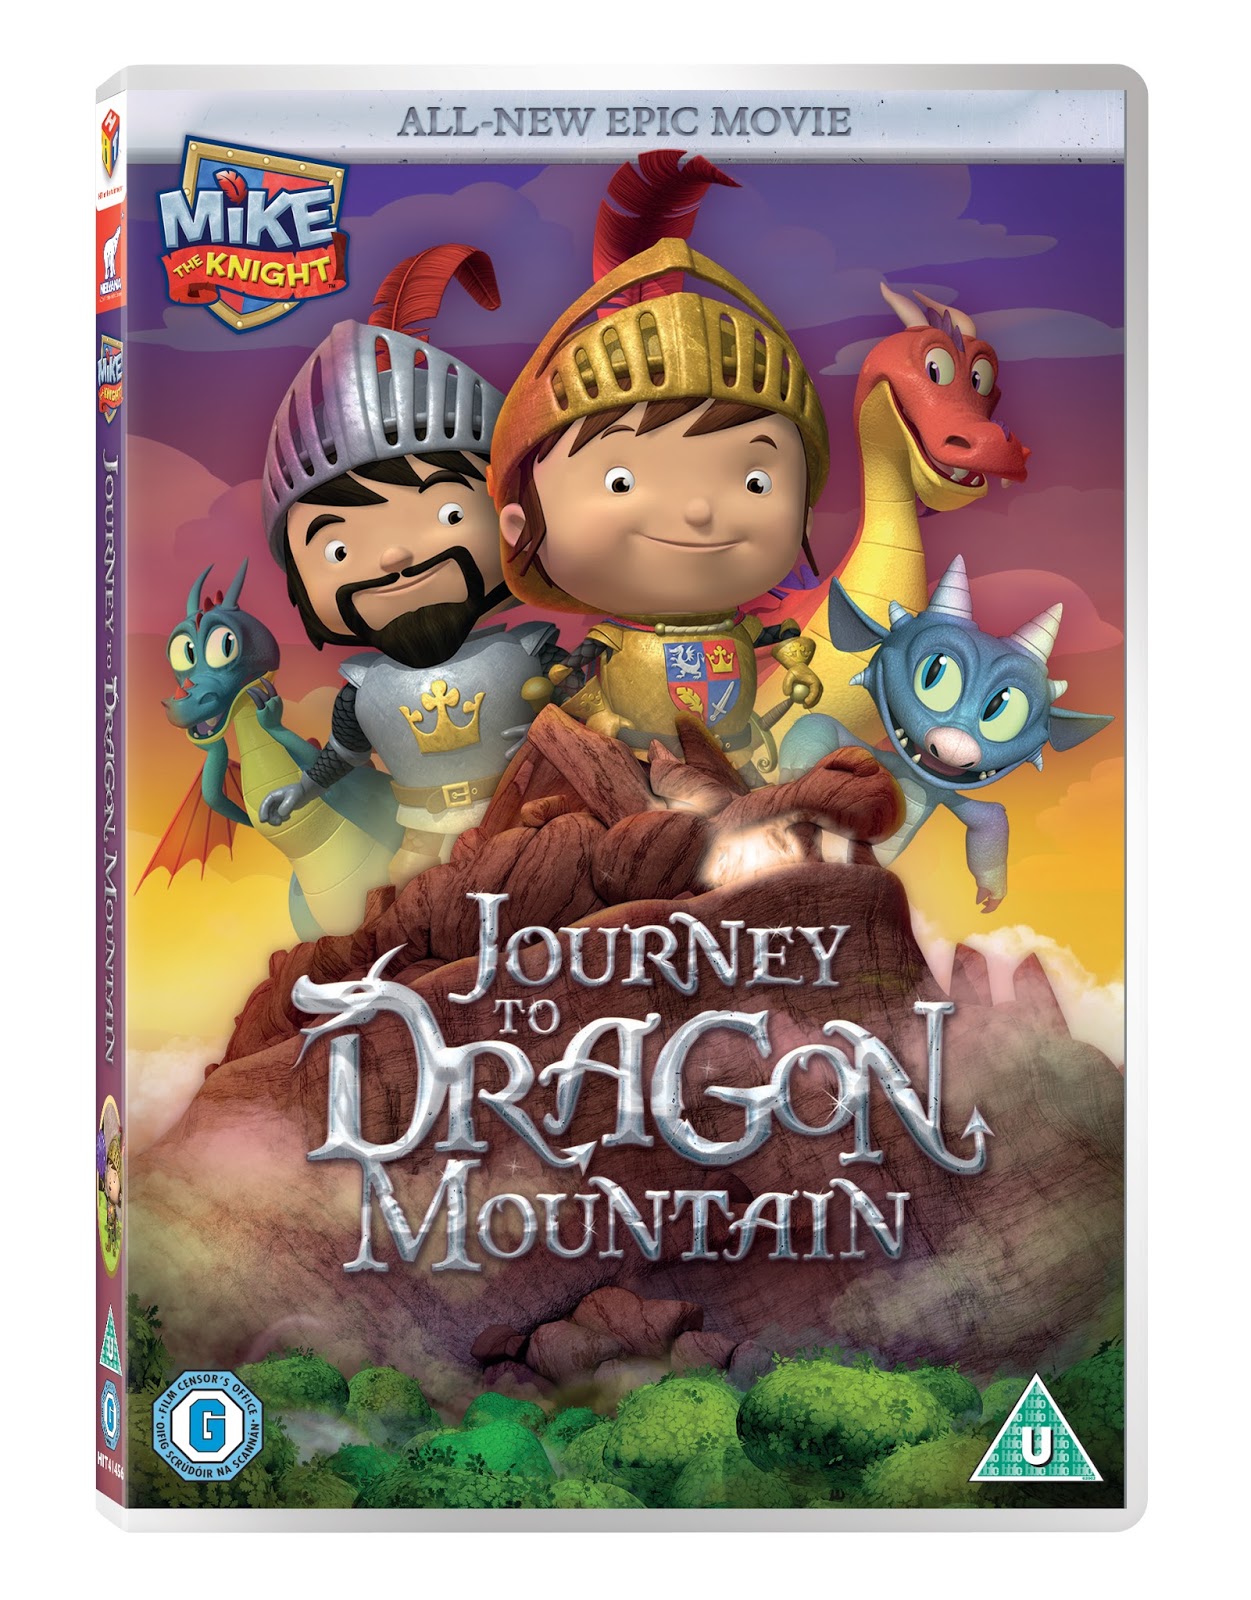 Mike the Knight Journey to Dragon Mountain